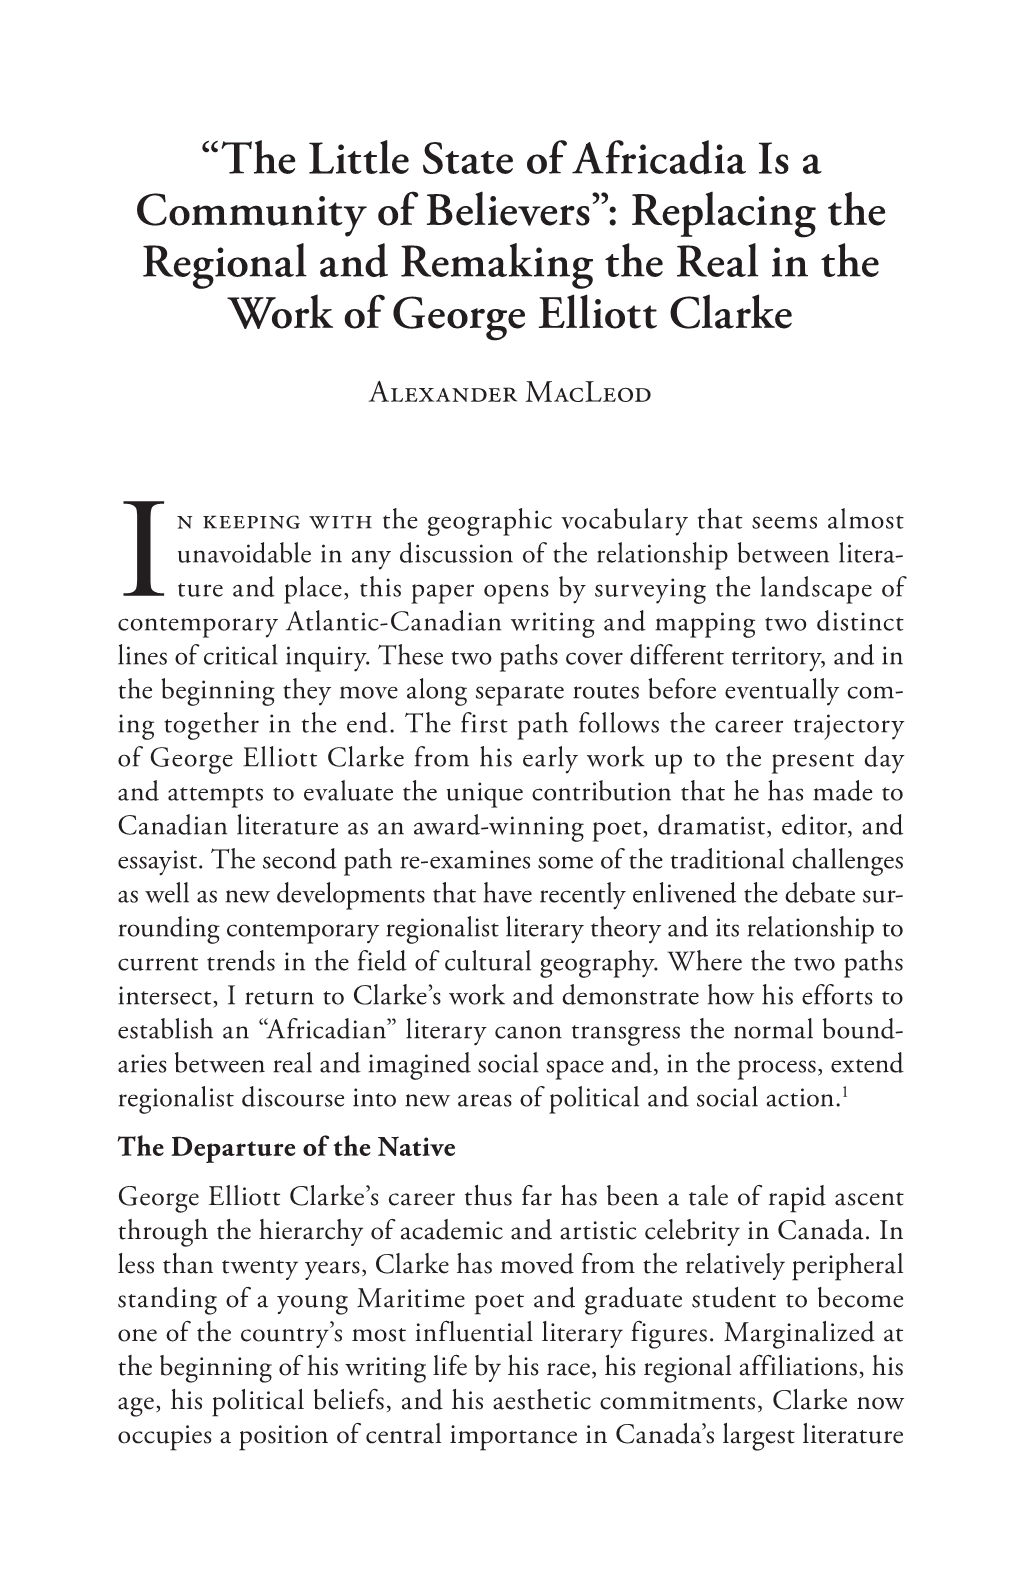 Replacing the Regional and Remaking the Real in the Work of George Elliott Clarke